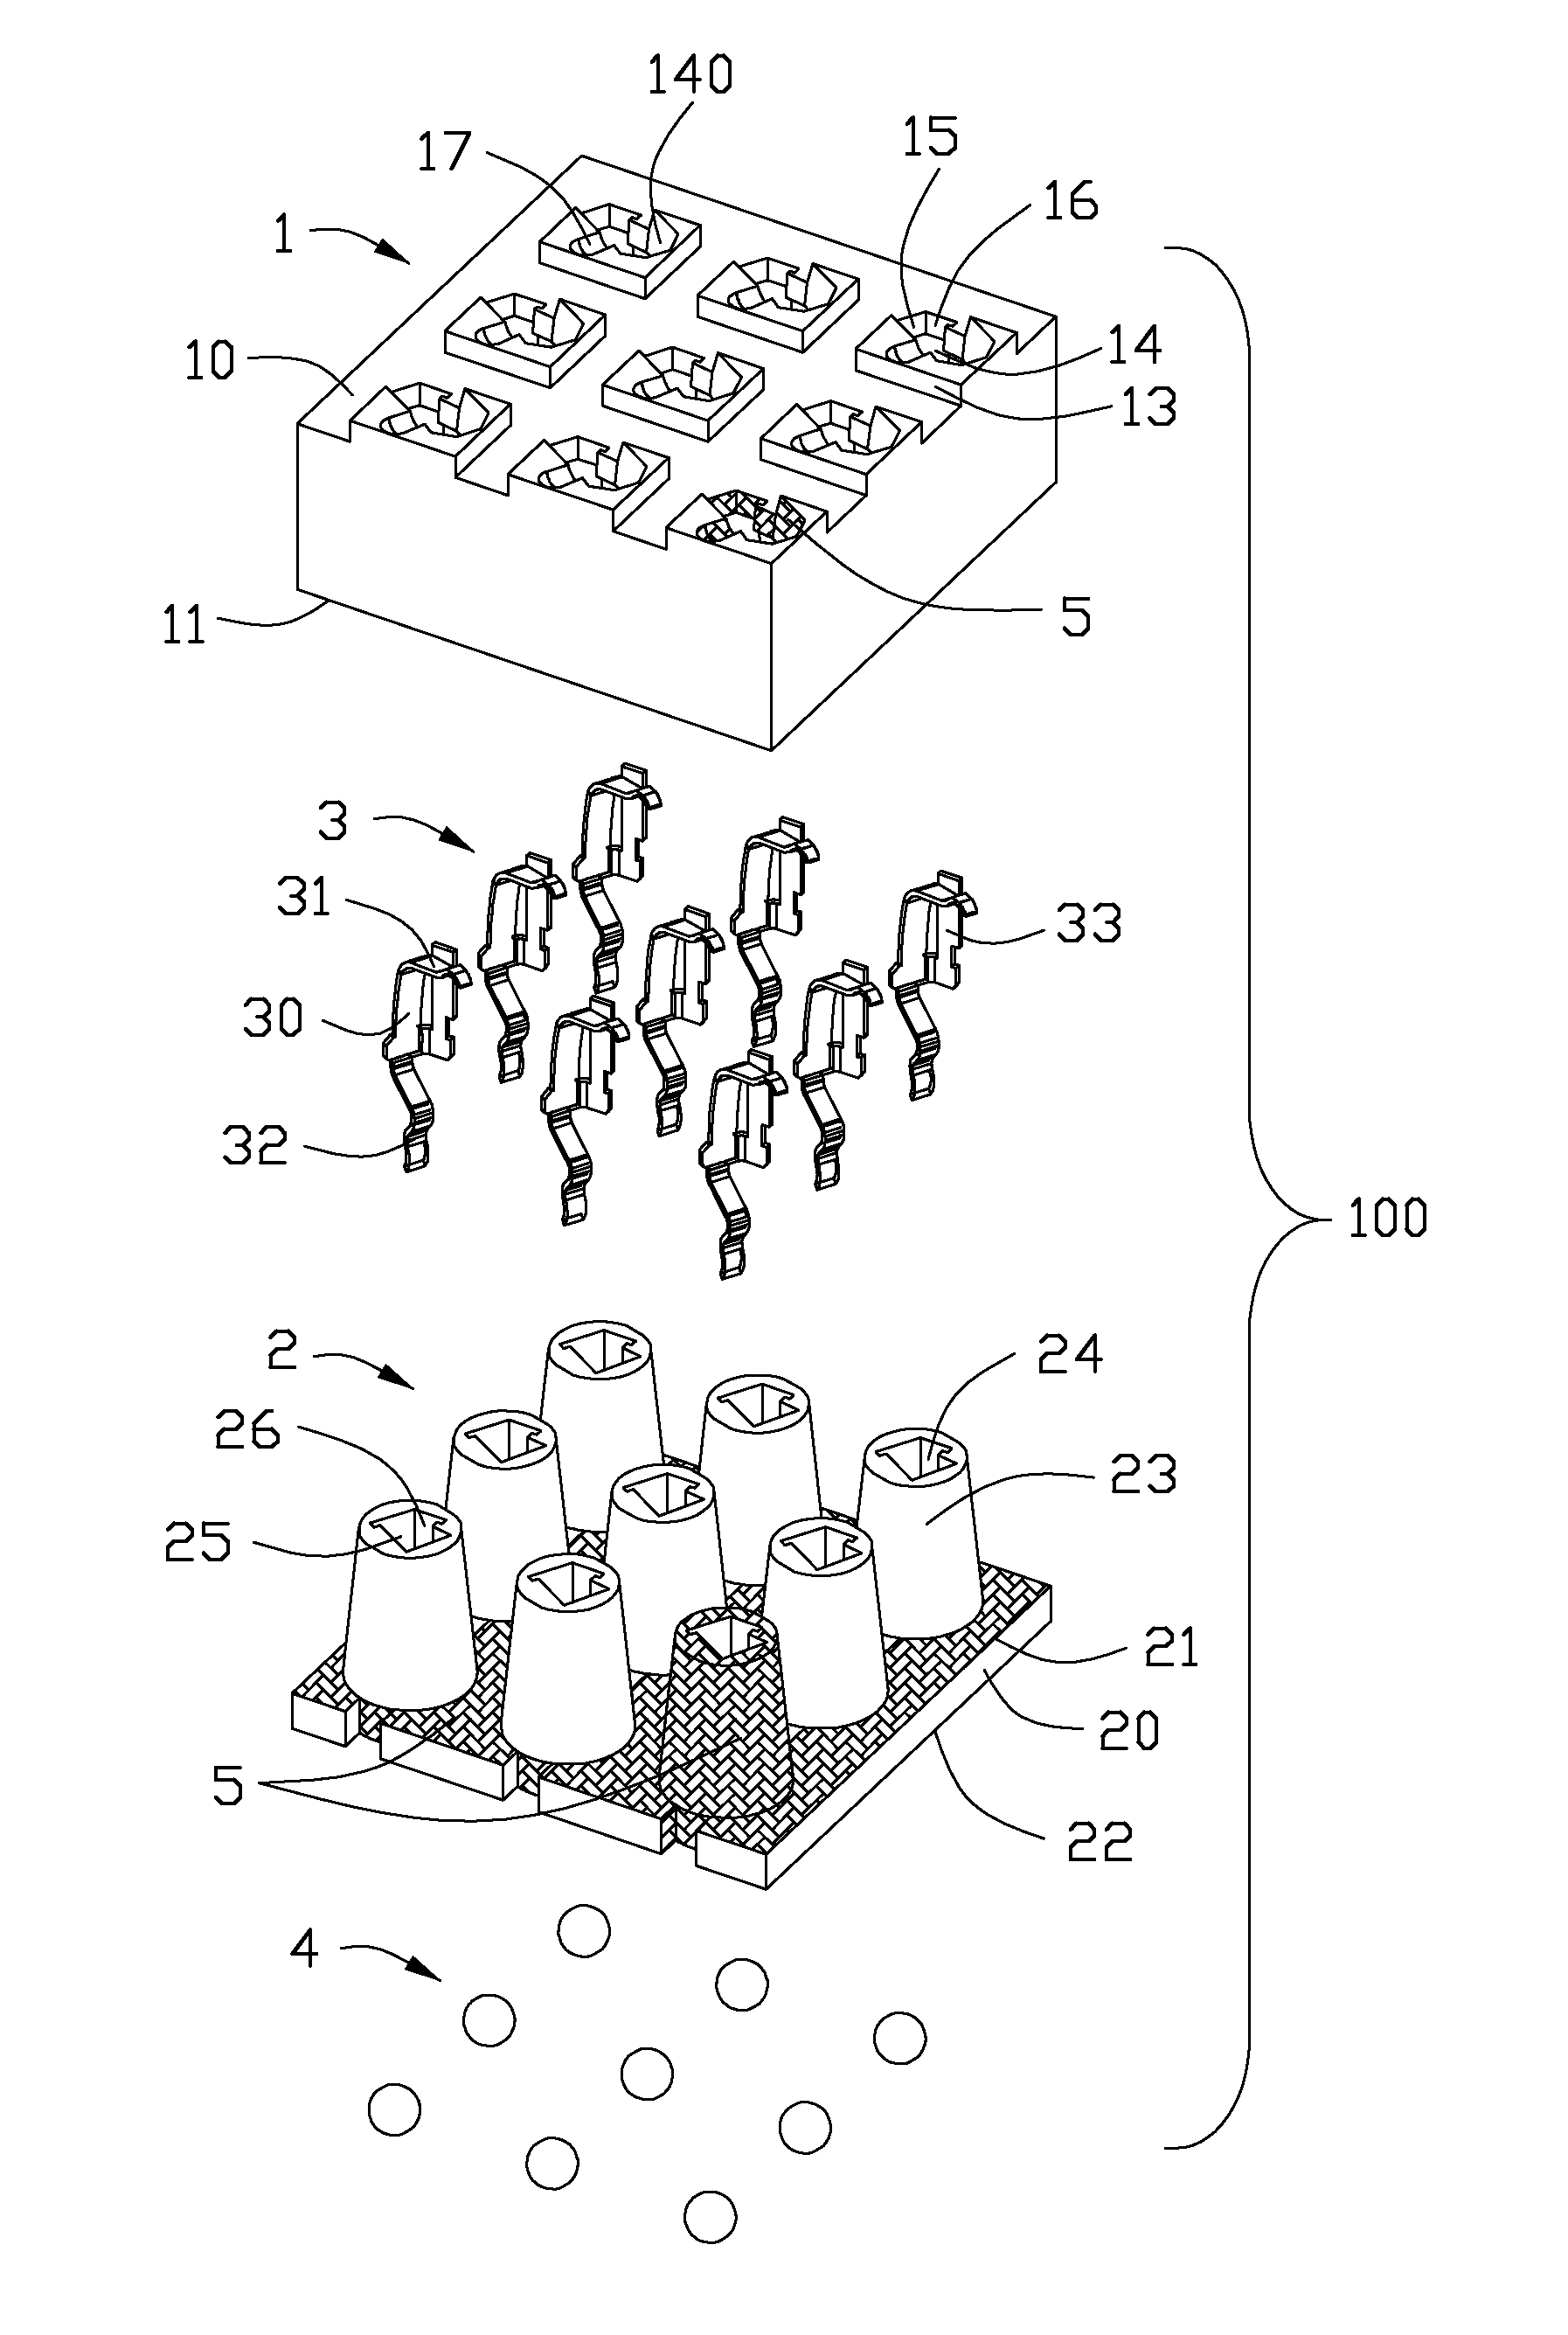 Shielding socket with two pieces housing components